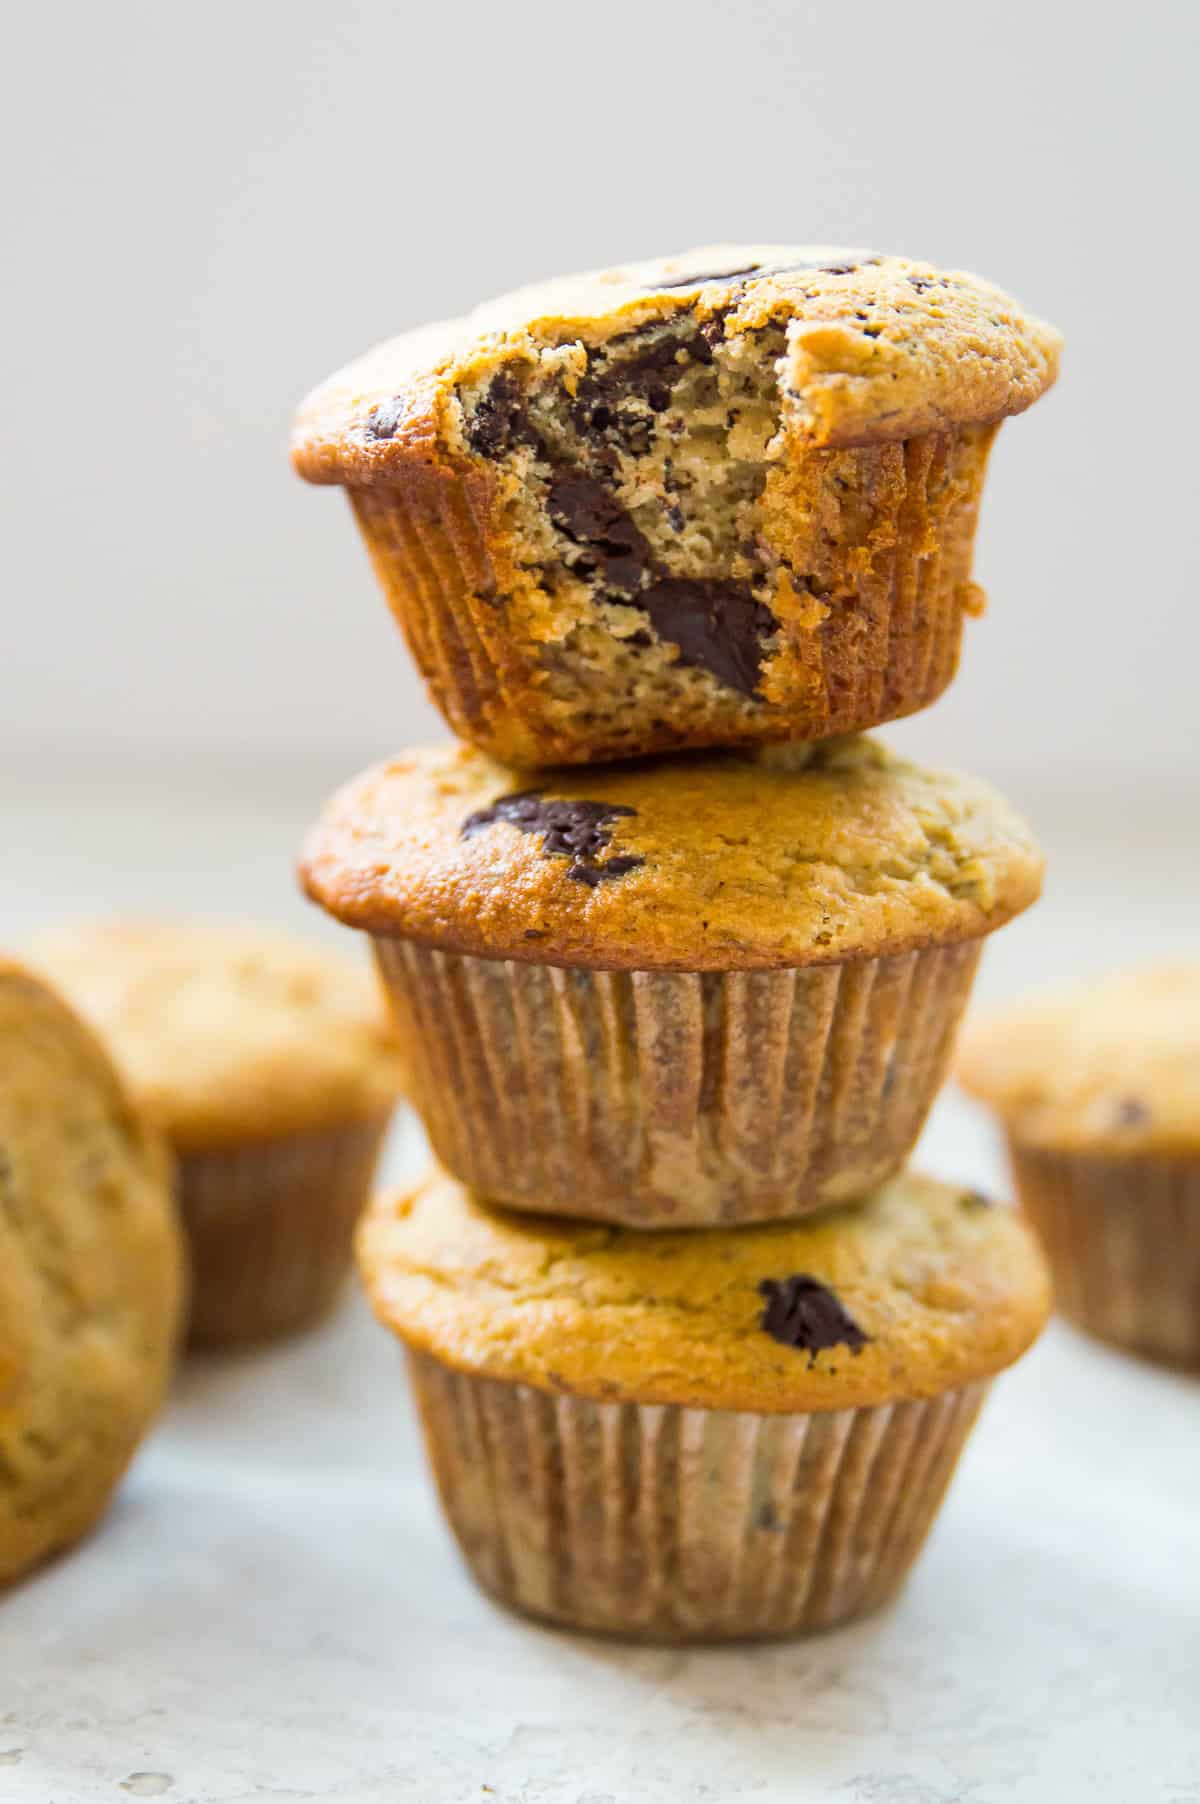 A stack of three banana muffins with chocolate with a bite out of the top muffin.